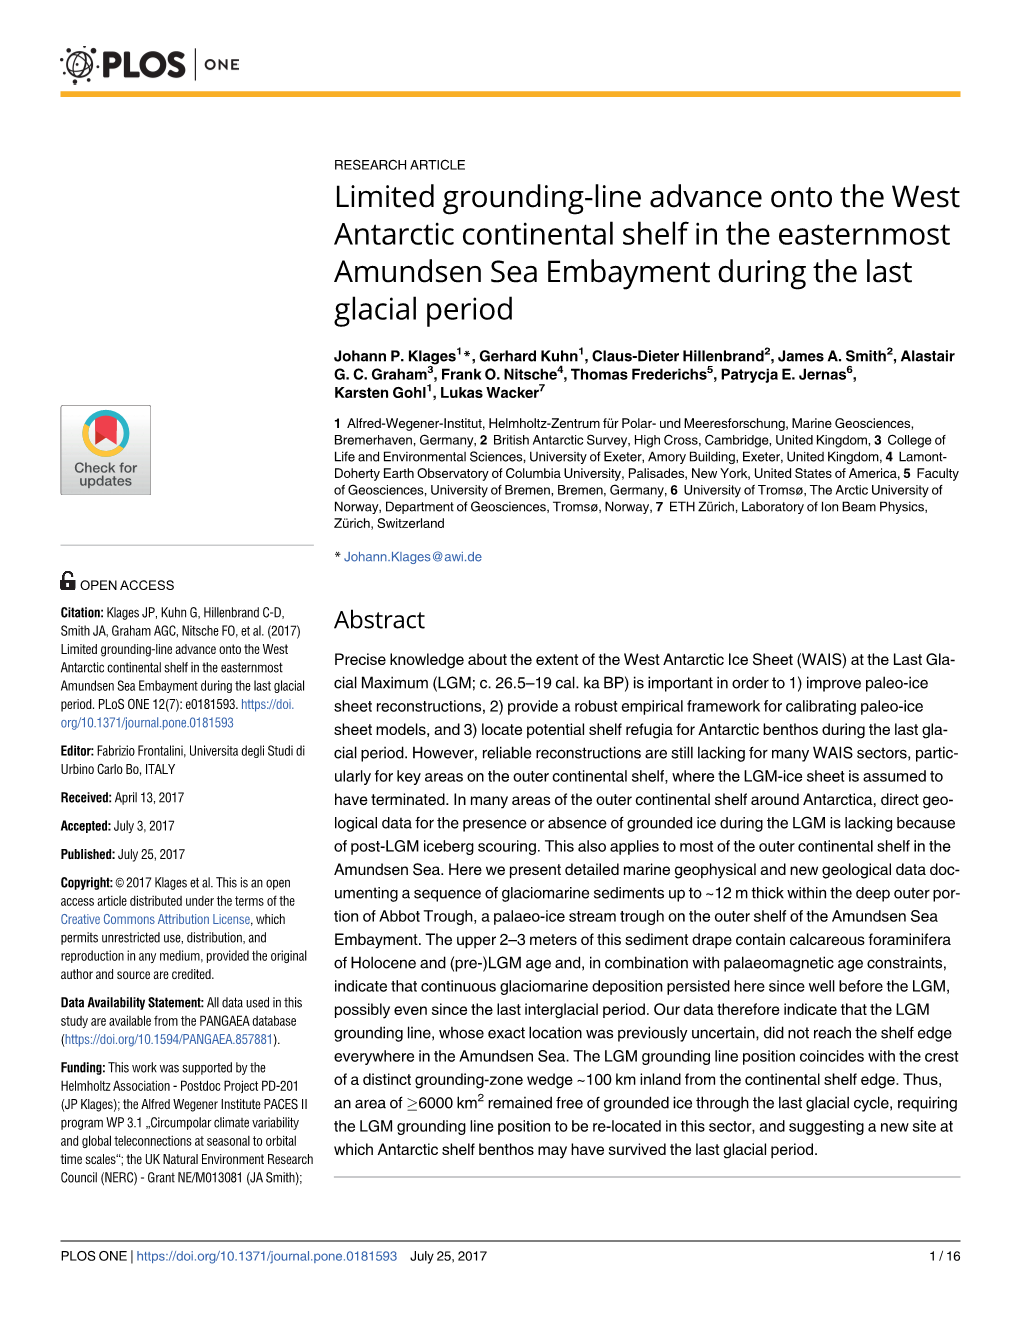 Limited Grounding-Line Advance Onto the West Antarctic Continental Shelf in the Easternmost Amundsen Sea Embayment During the Last Glacial Period